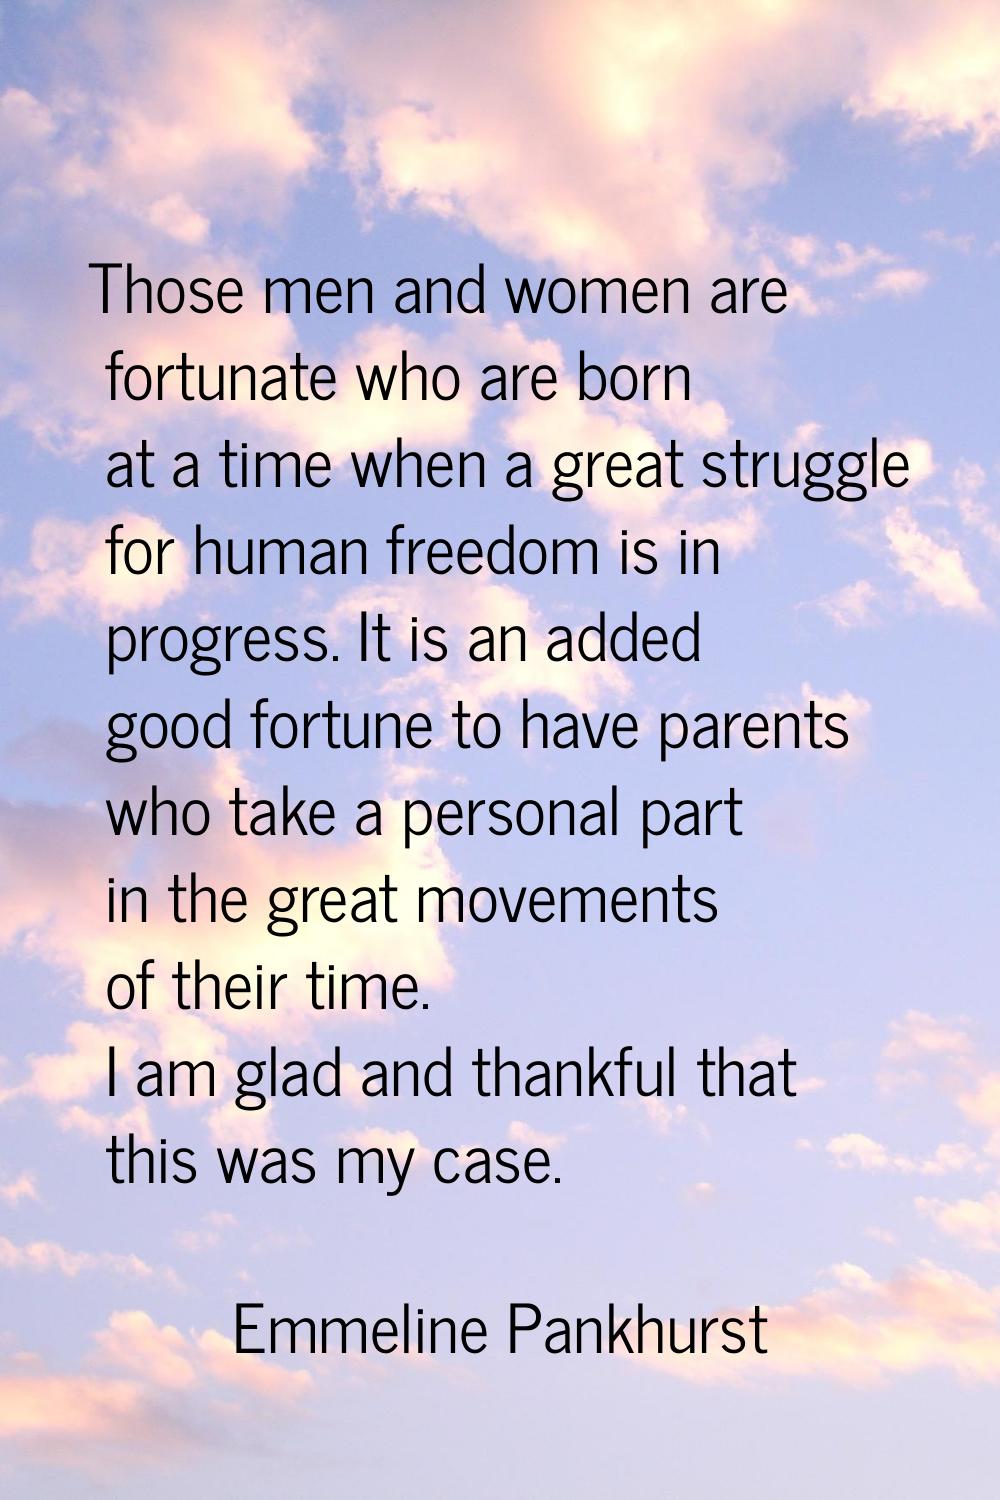 Those men and women are fortunate who are born at a time when a great struggle for human freedom is